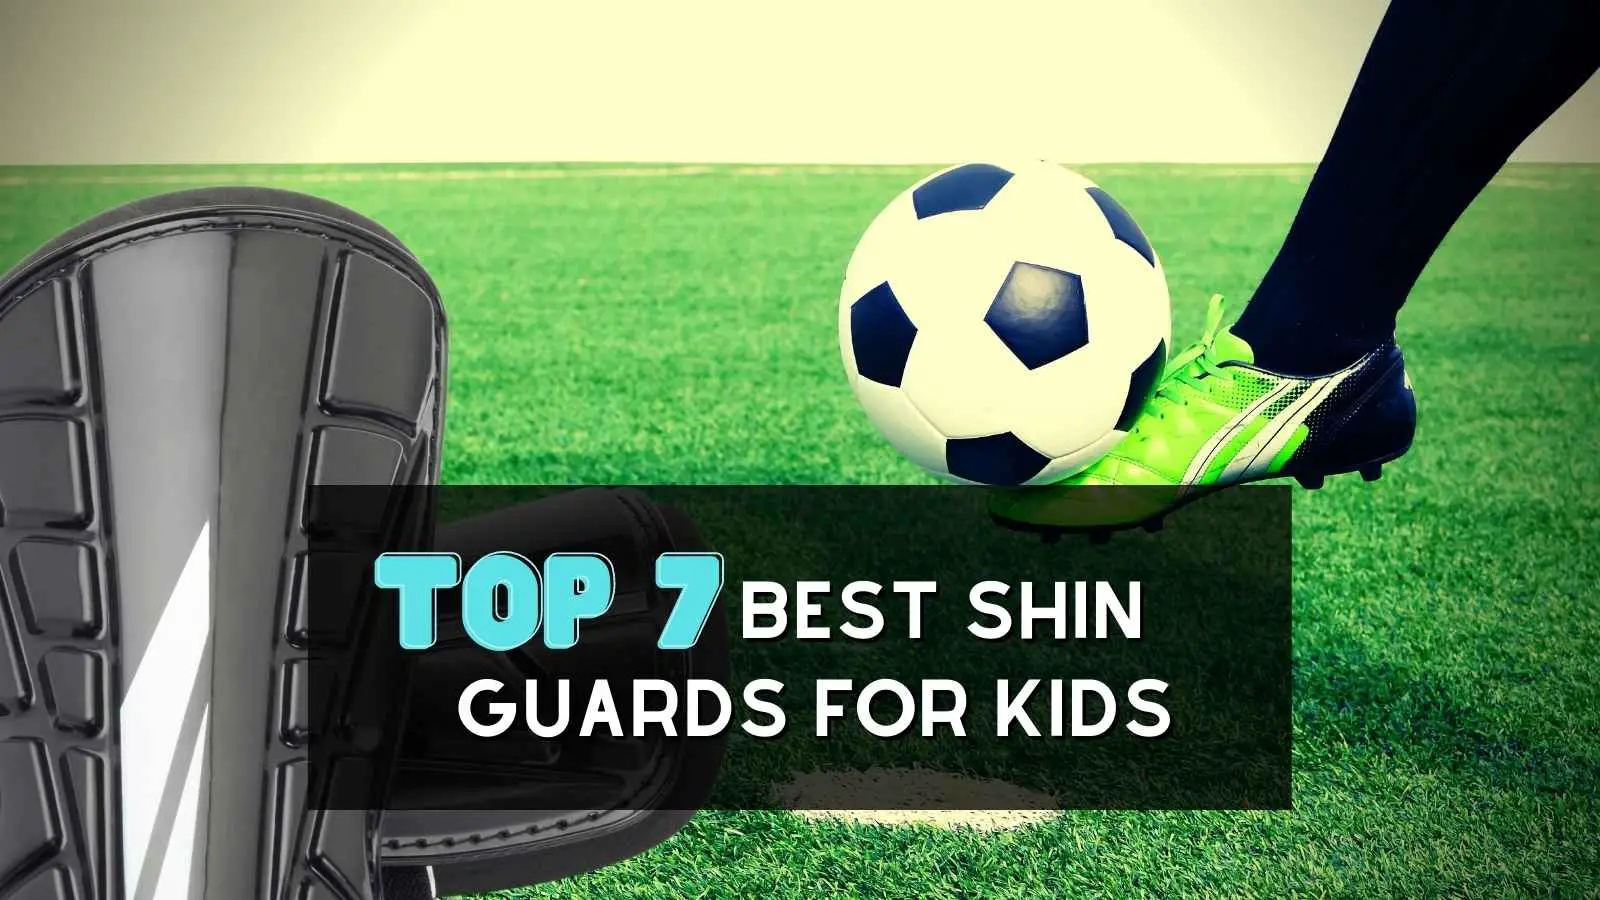 Top 7 Best Shin Guards For Kids